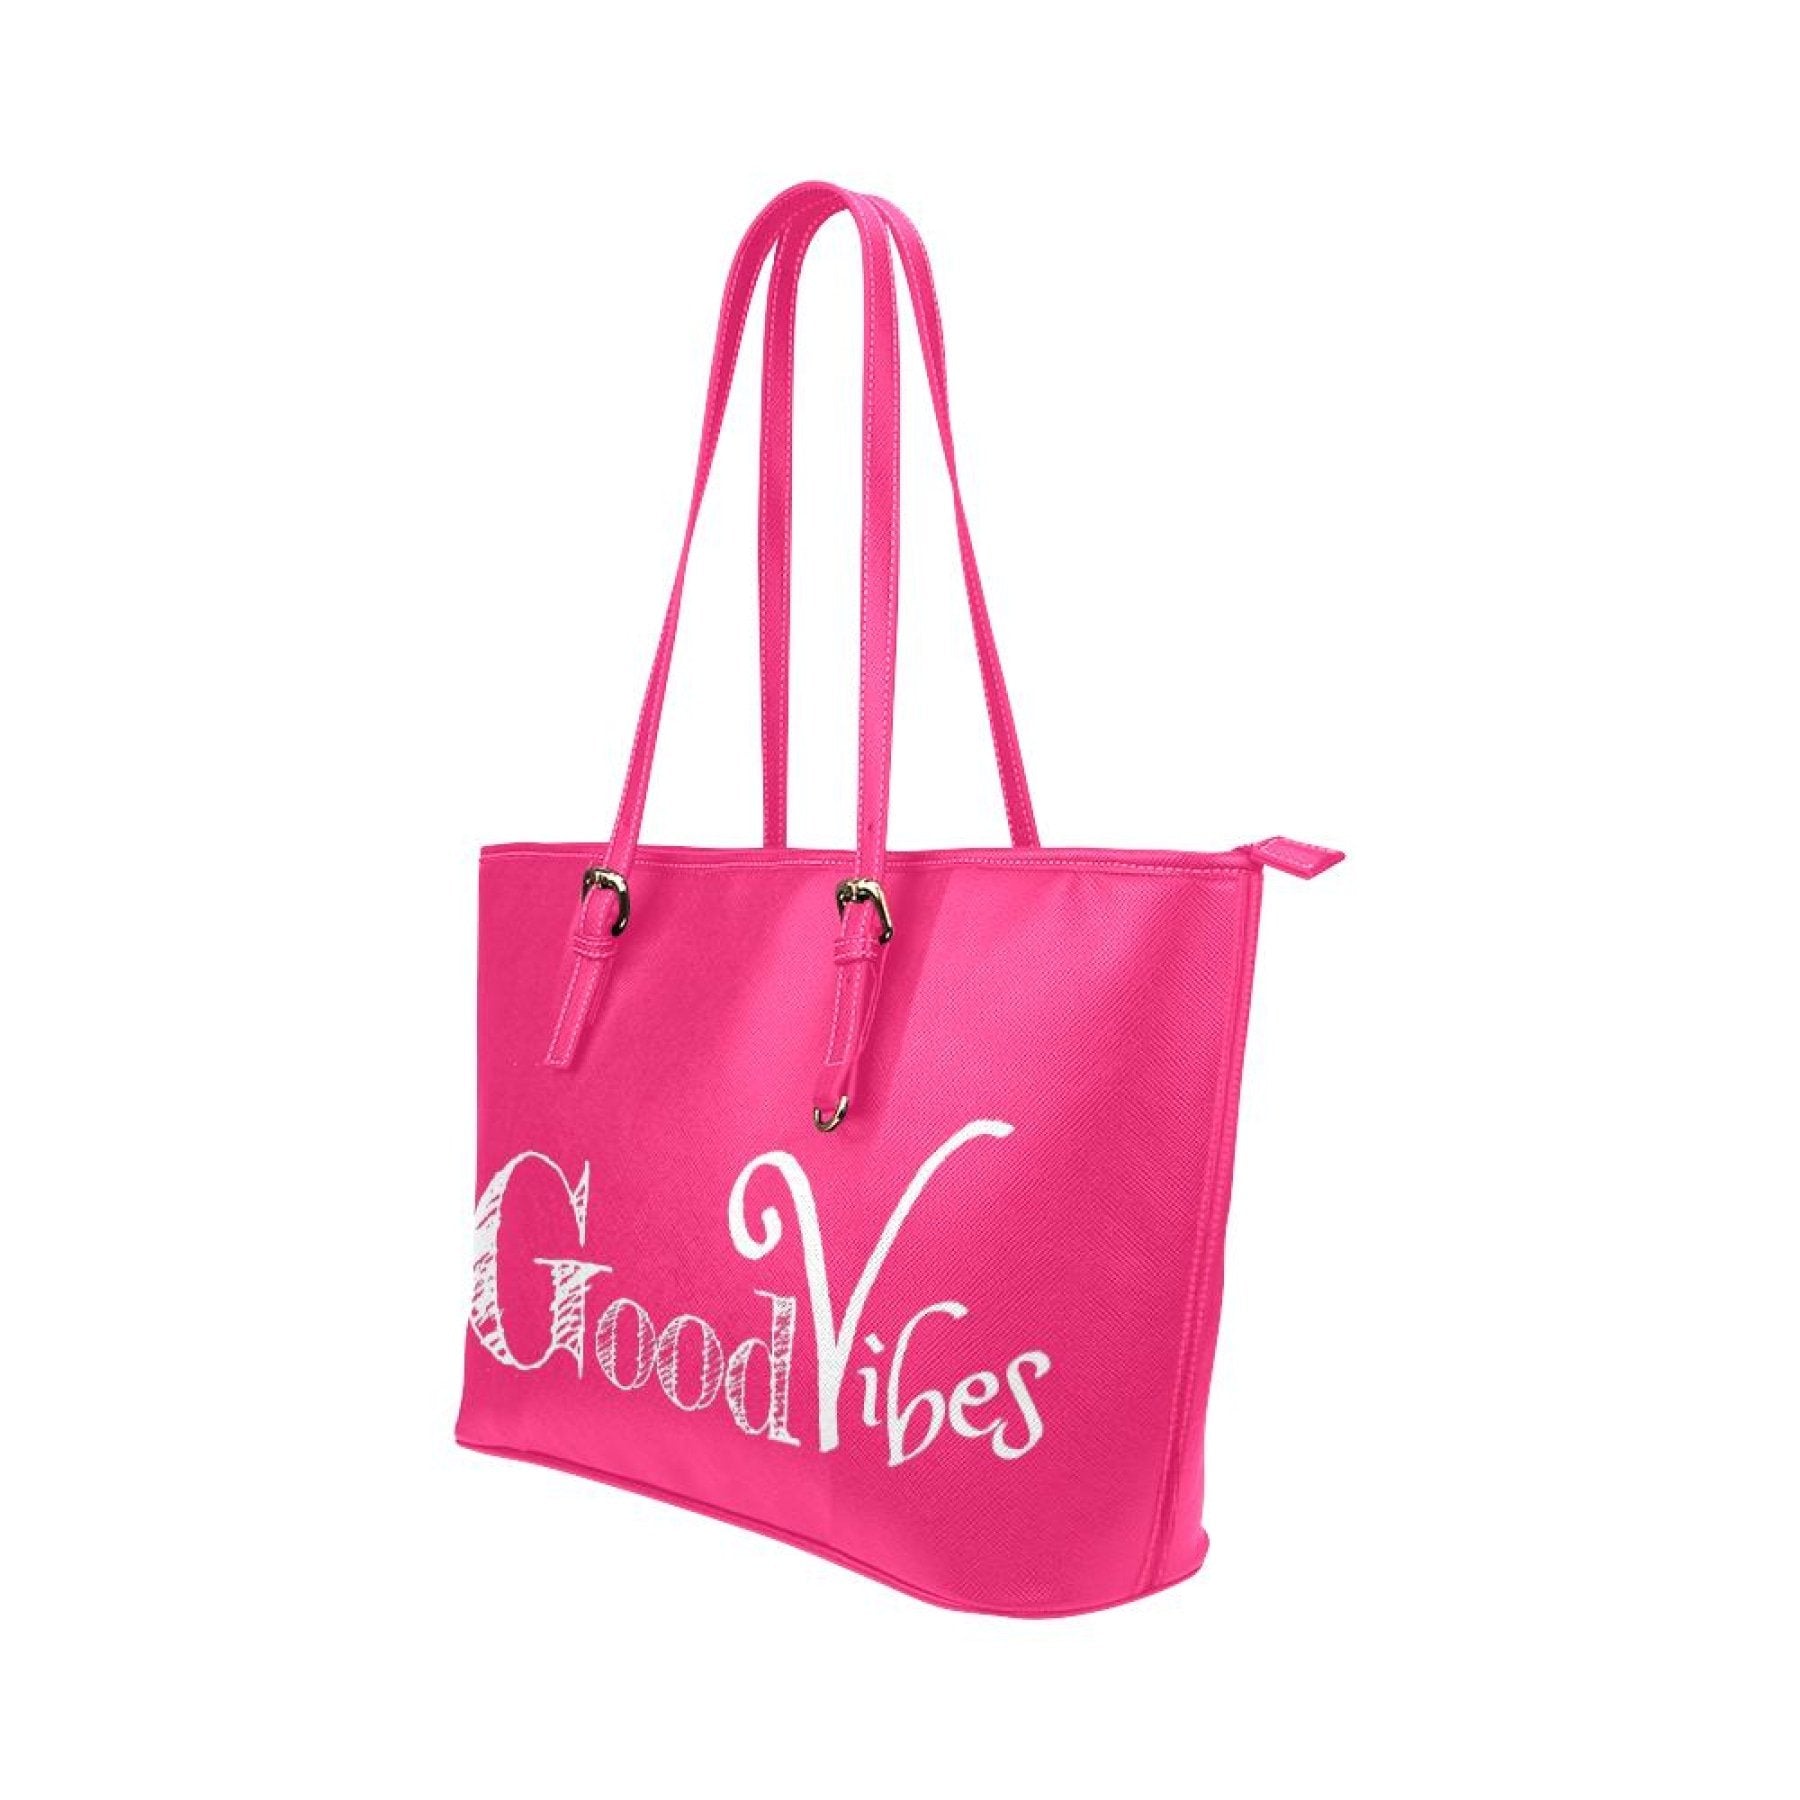 Shoulder Bag - Pink Good Vibes Graphic Style Large Leather Tote Bag Grey Coco